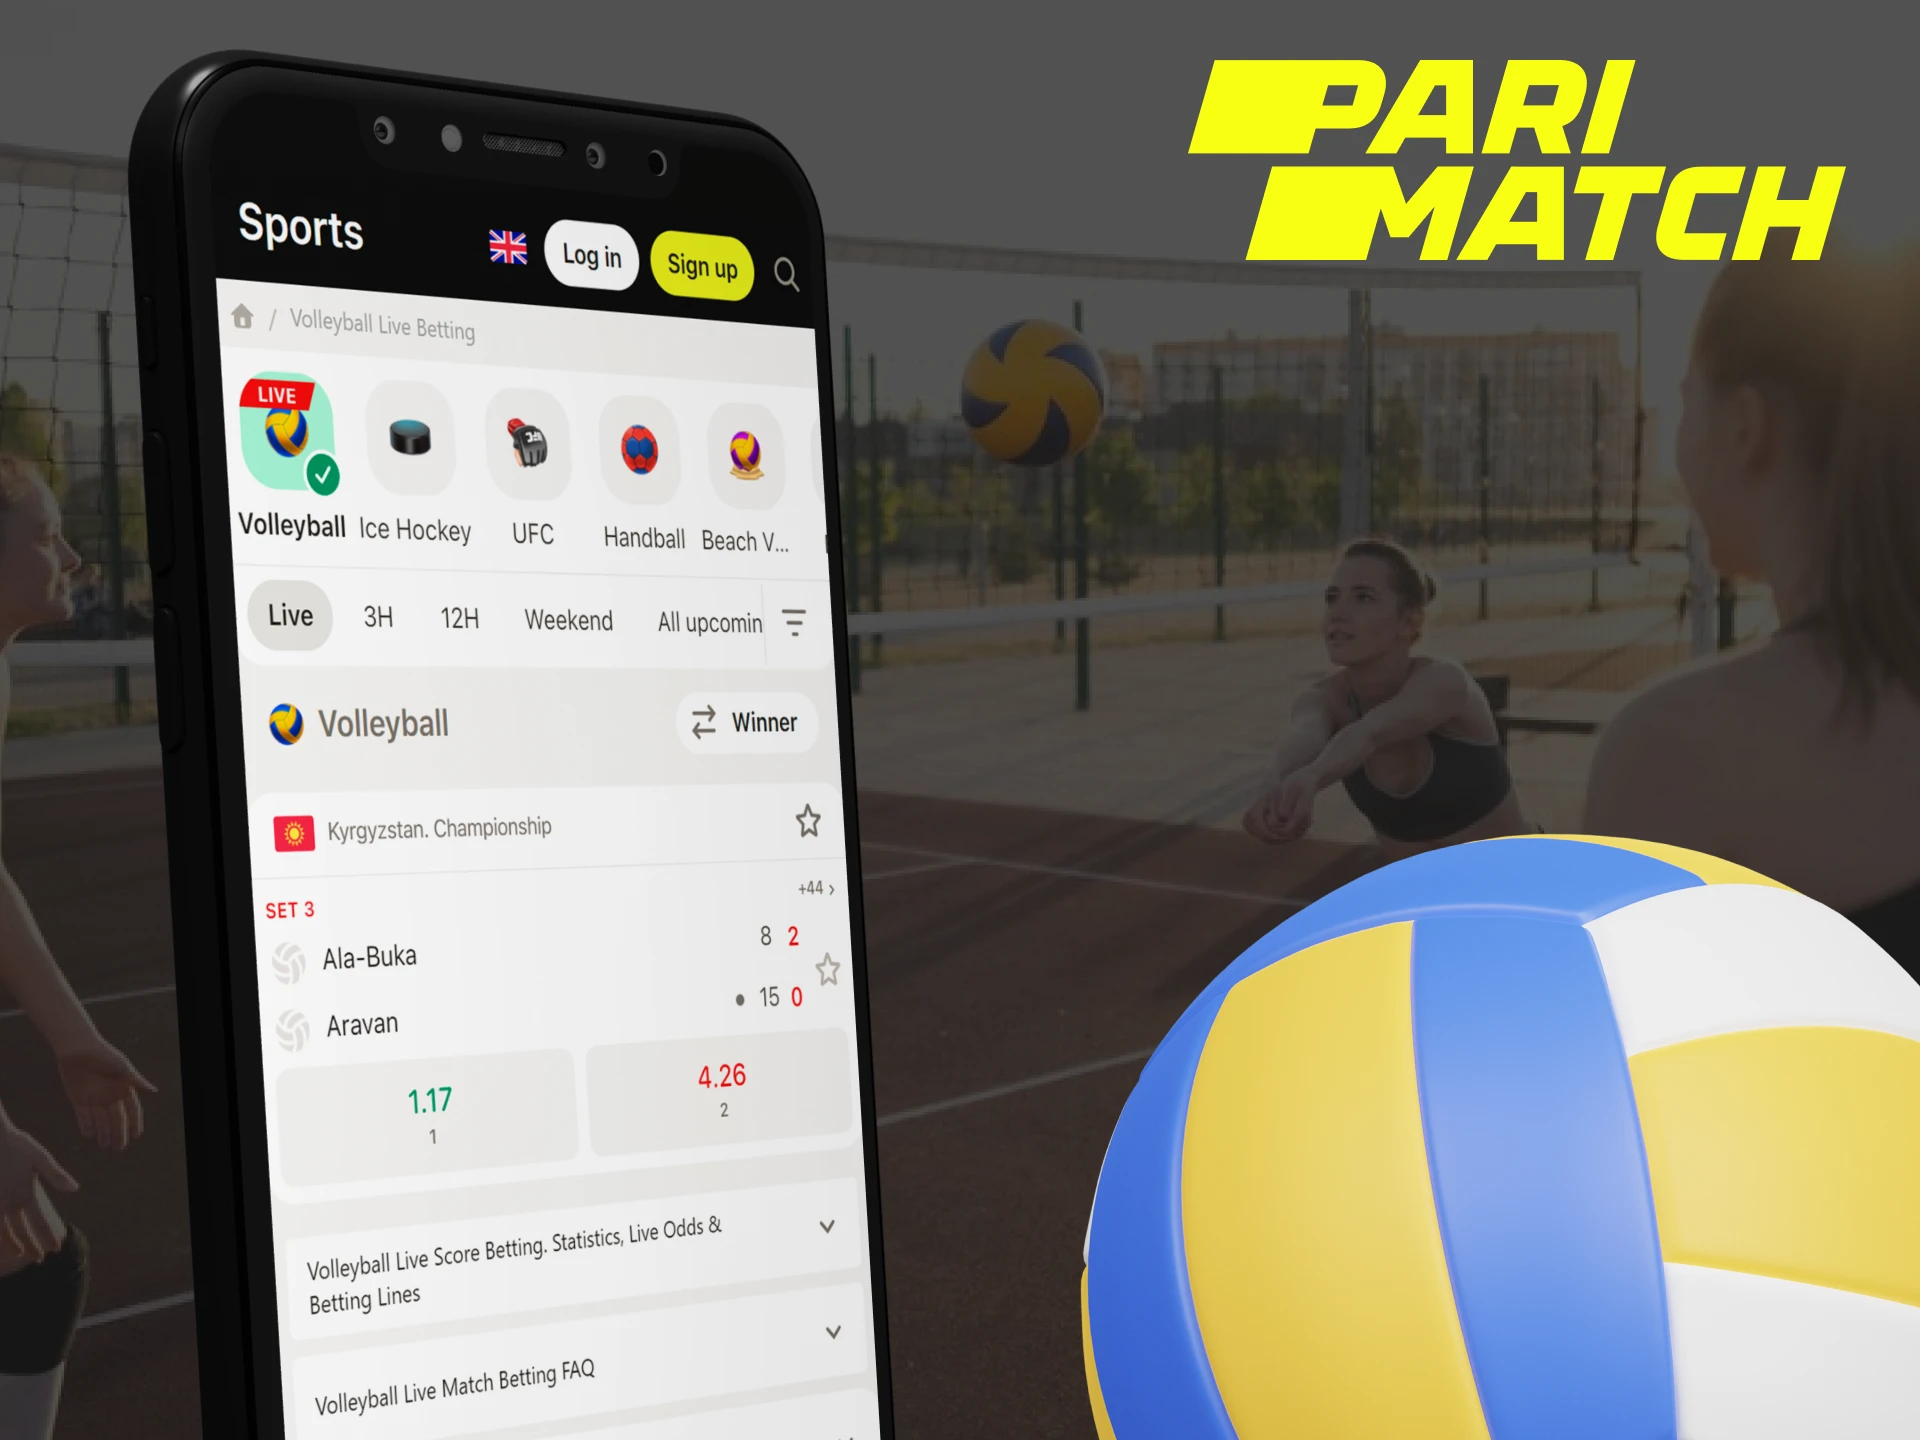 Parimatch has a large volleyball betting section, find it and place your bet.